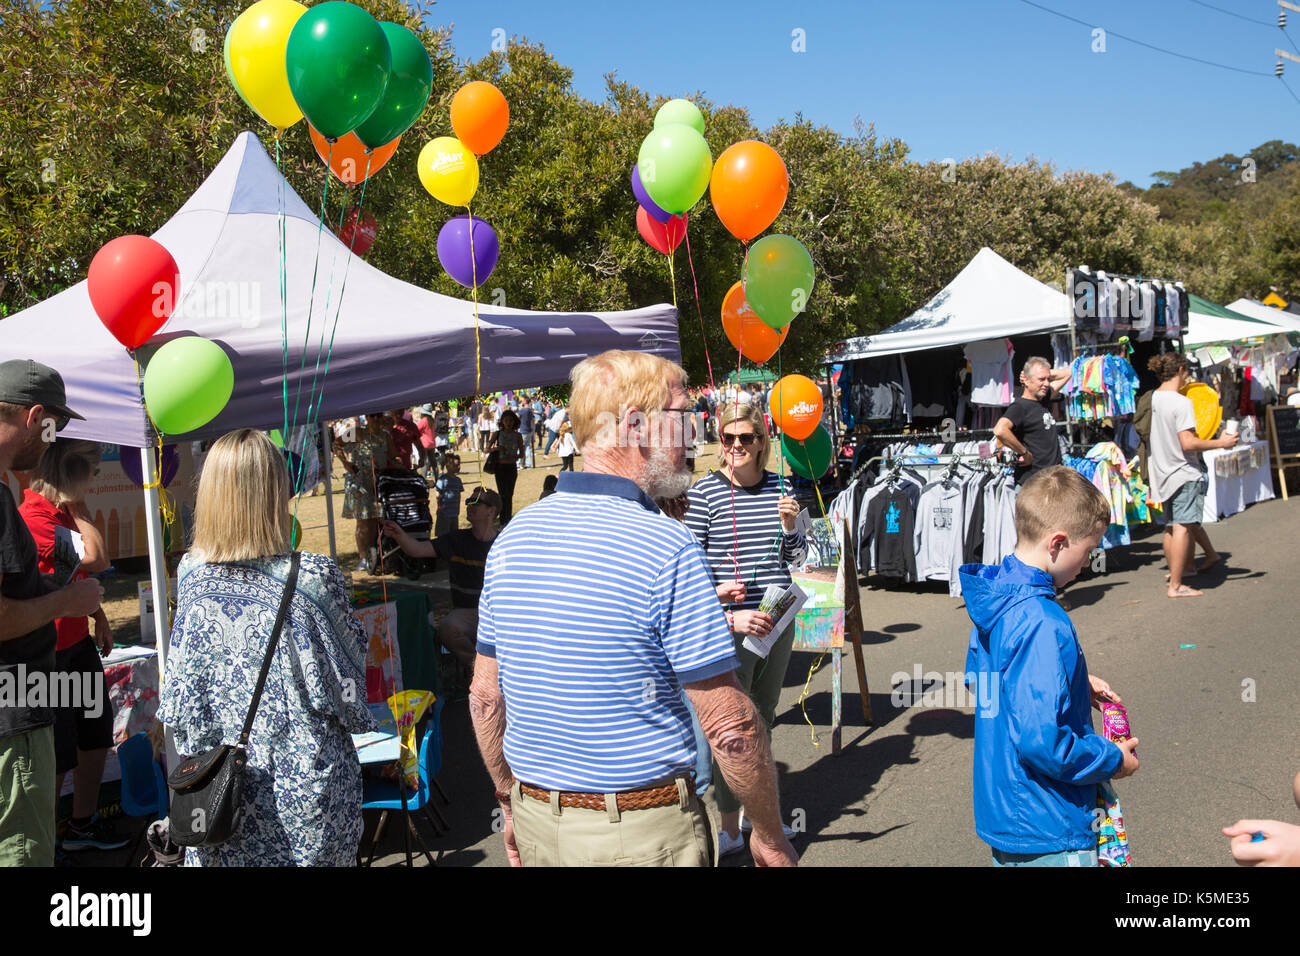 Australian school and community fete in Sydney, New South Wales, Australia with balloons above market stalls Stock Photo